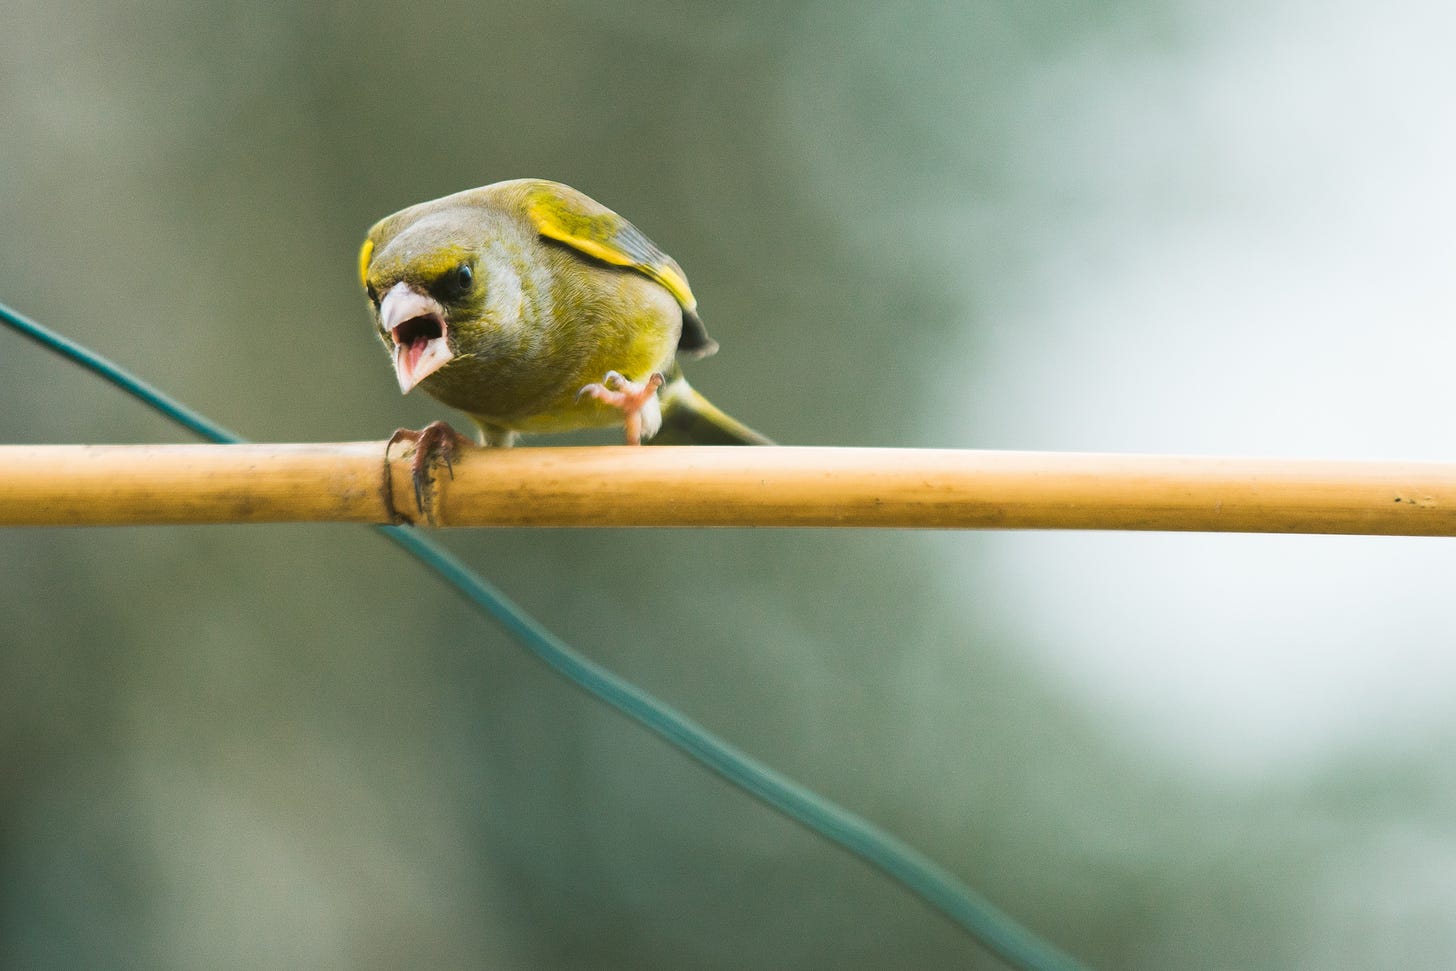 Angry looking bird perches on bamboo and stamps its little foot. Bird is yellowy green.